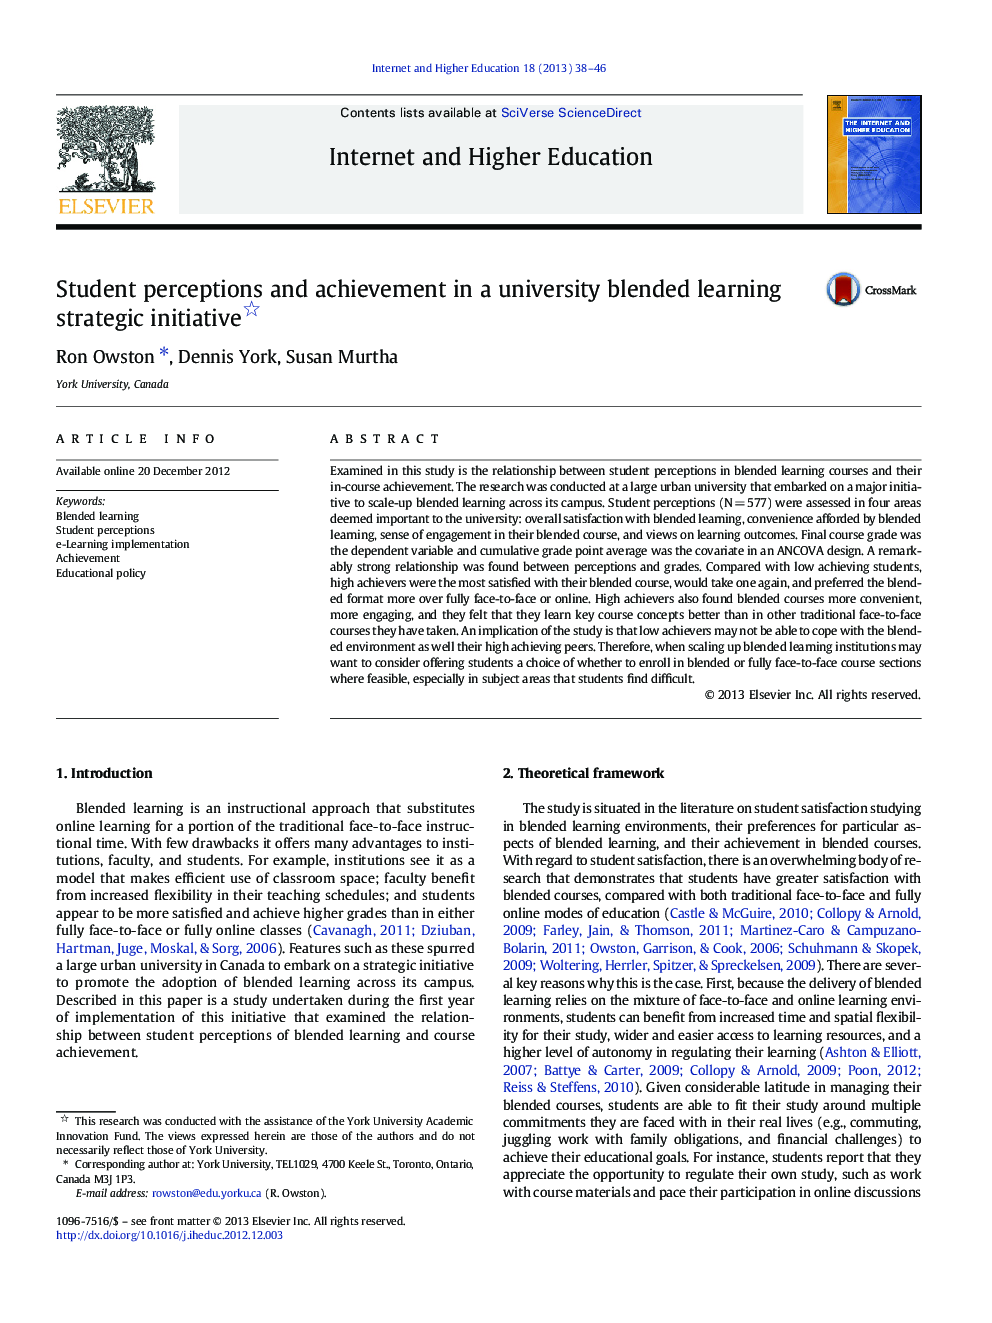 Student perceptions and achievement in a university blended learning strategic initiative 